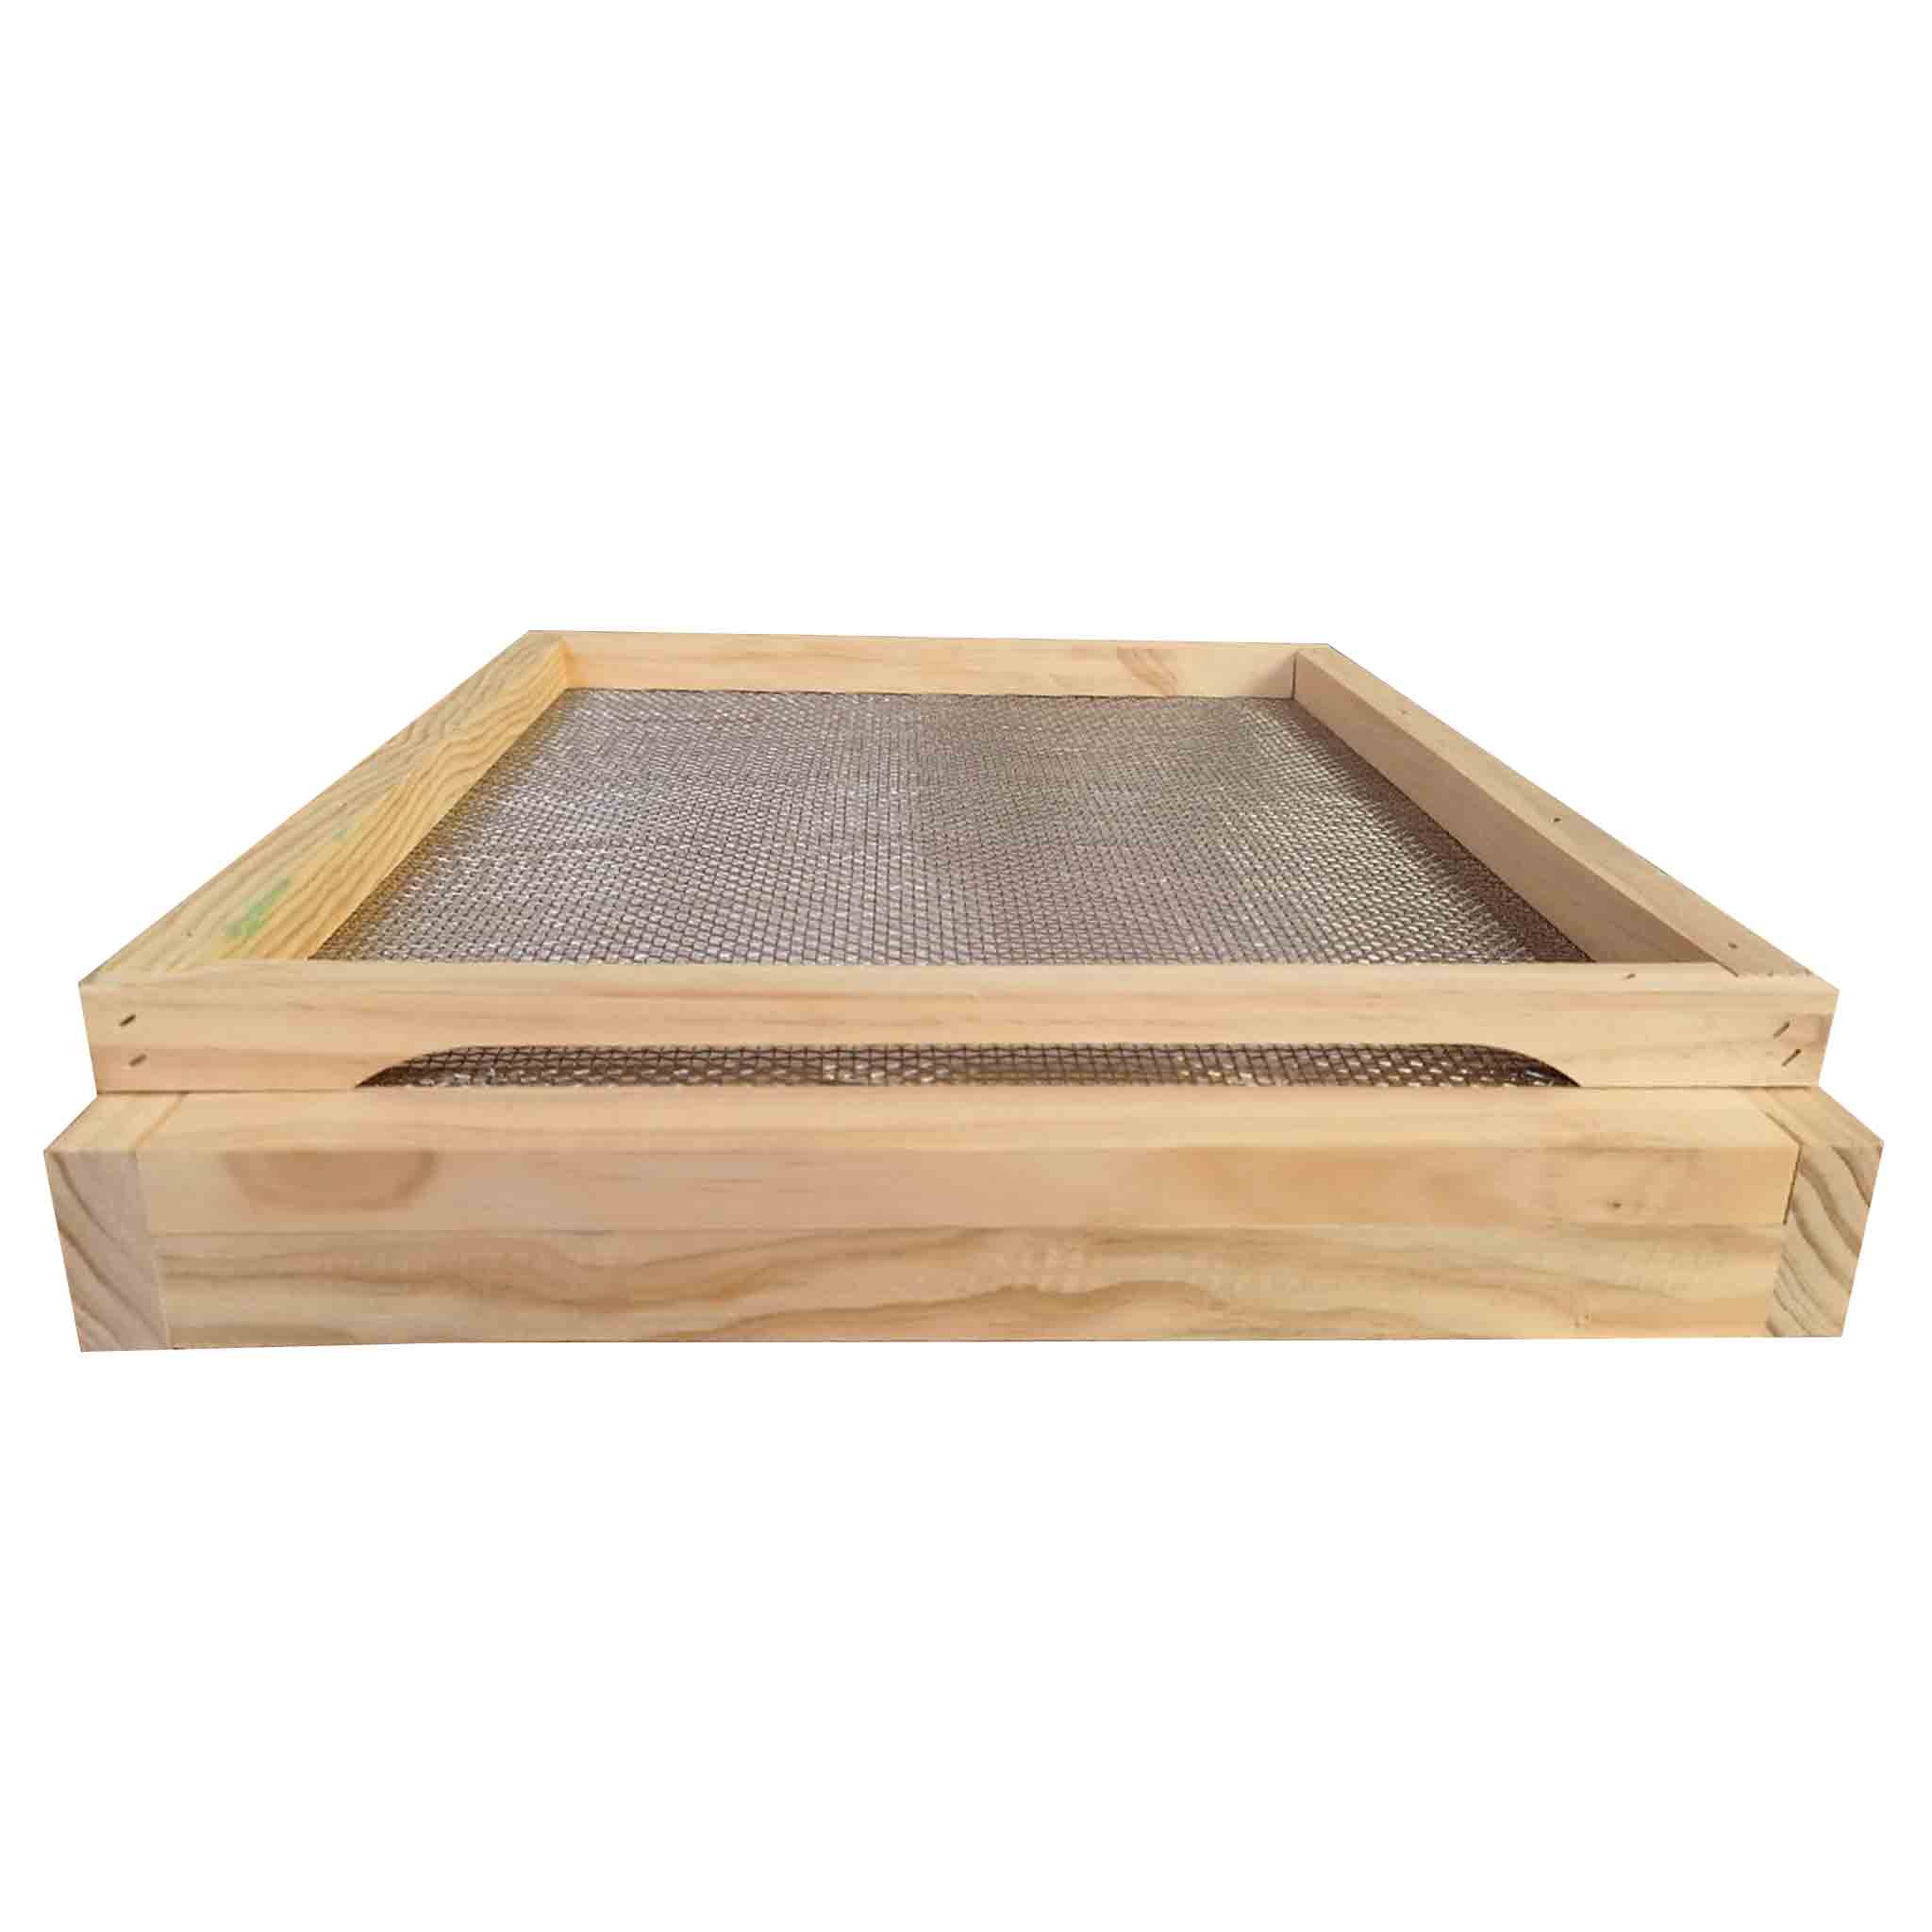 Screened Ventilation Bottom Board/Screened Floorboard - Hive Parts collection by Buzzbee Beekeeping Supplies